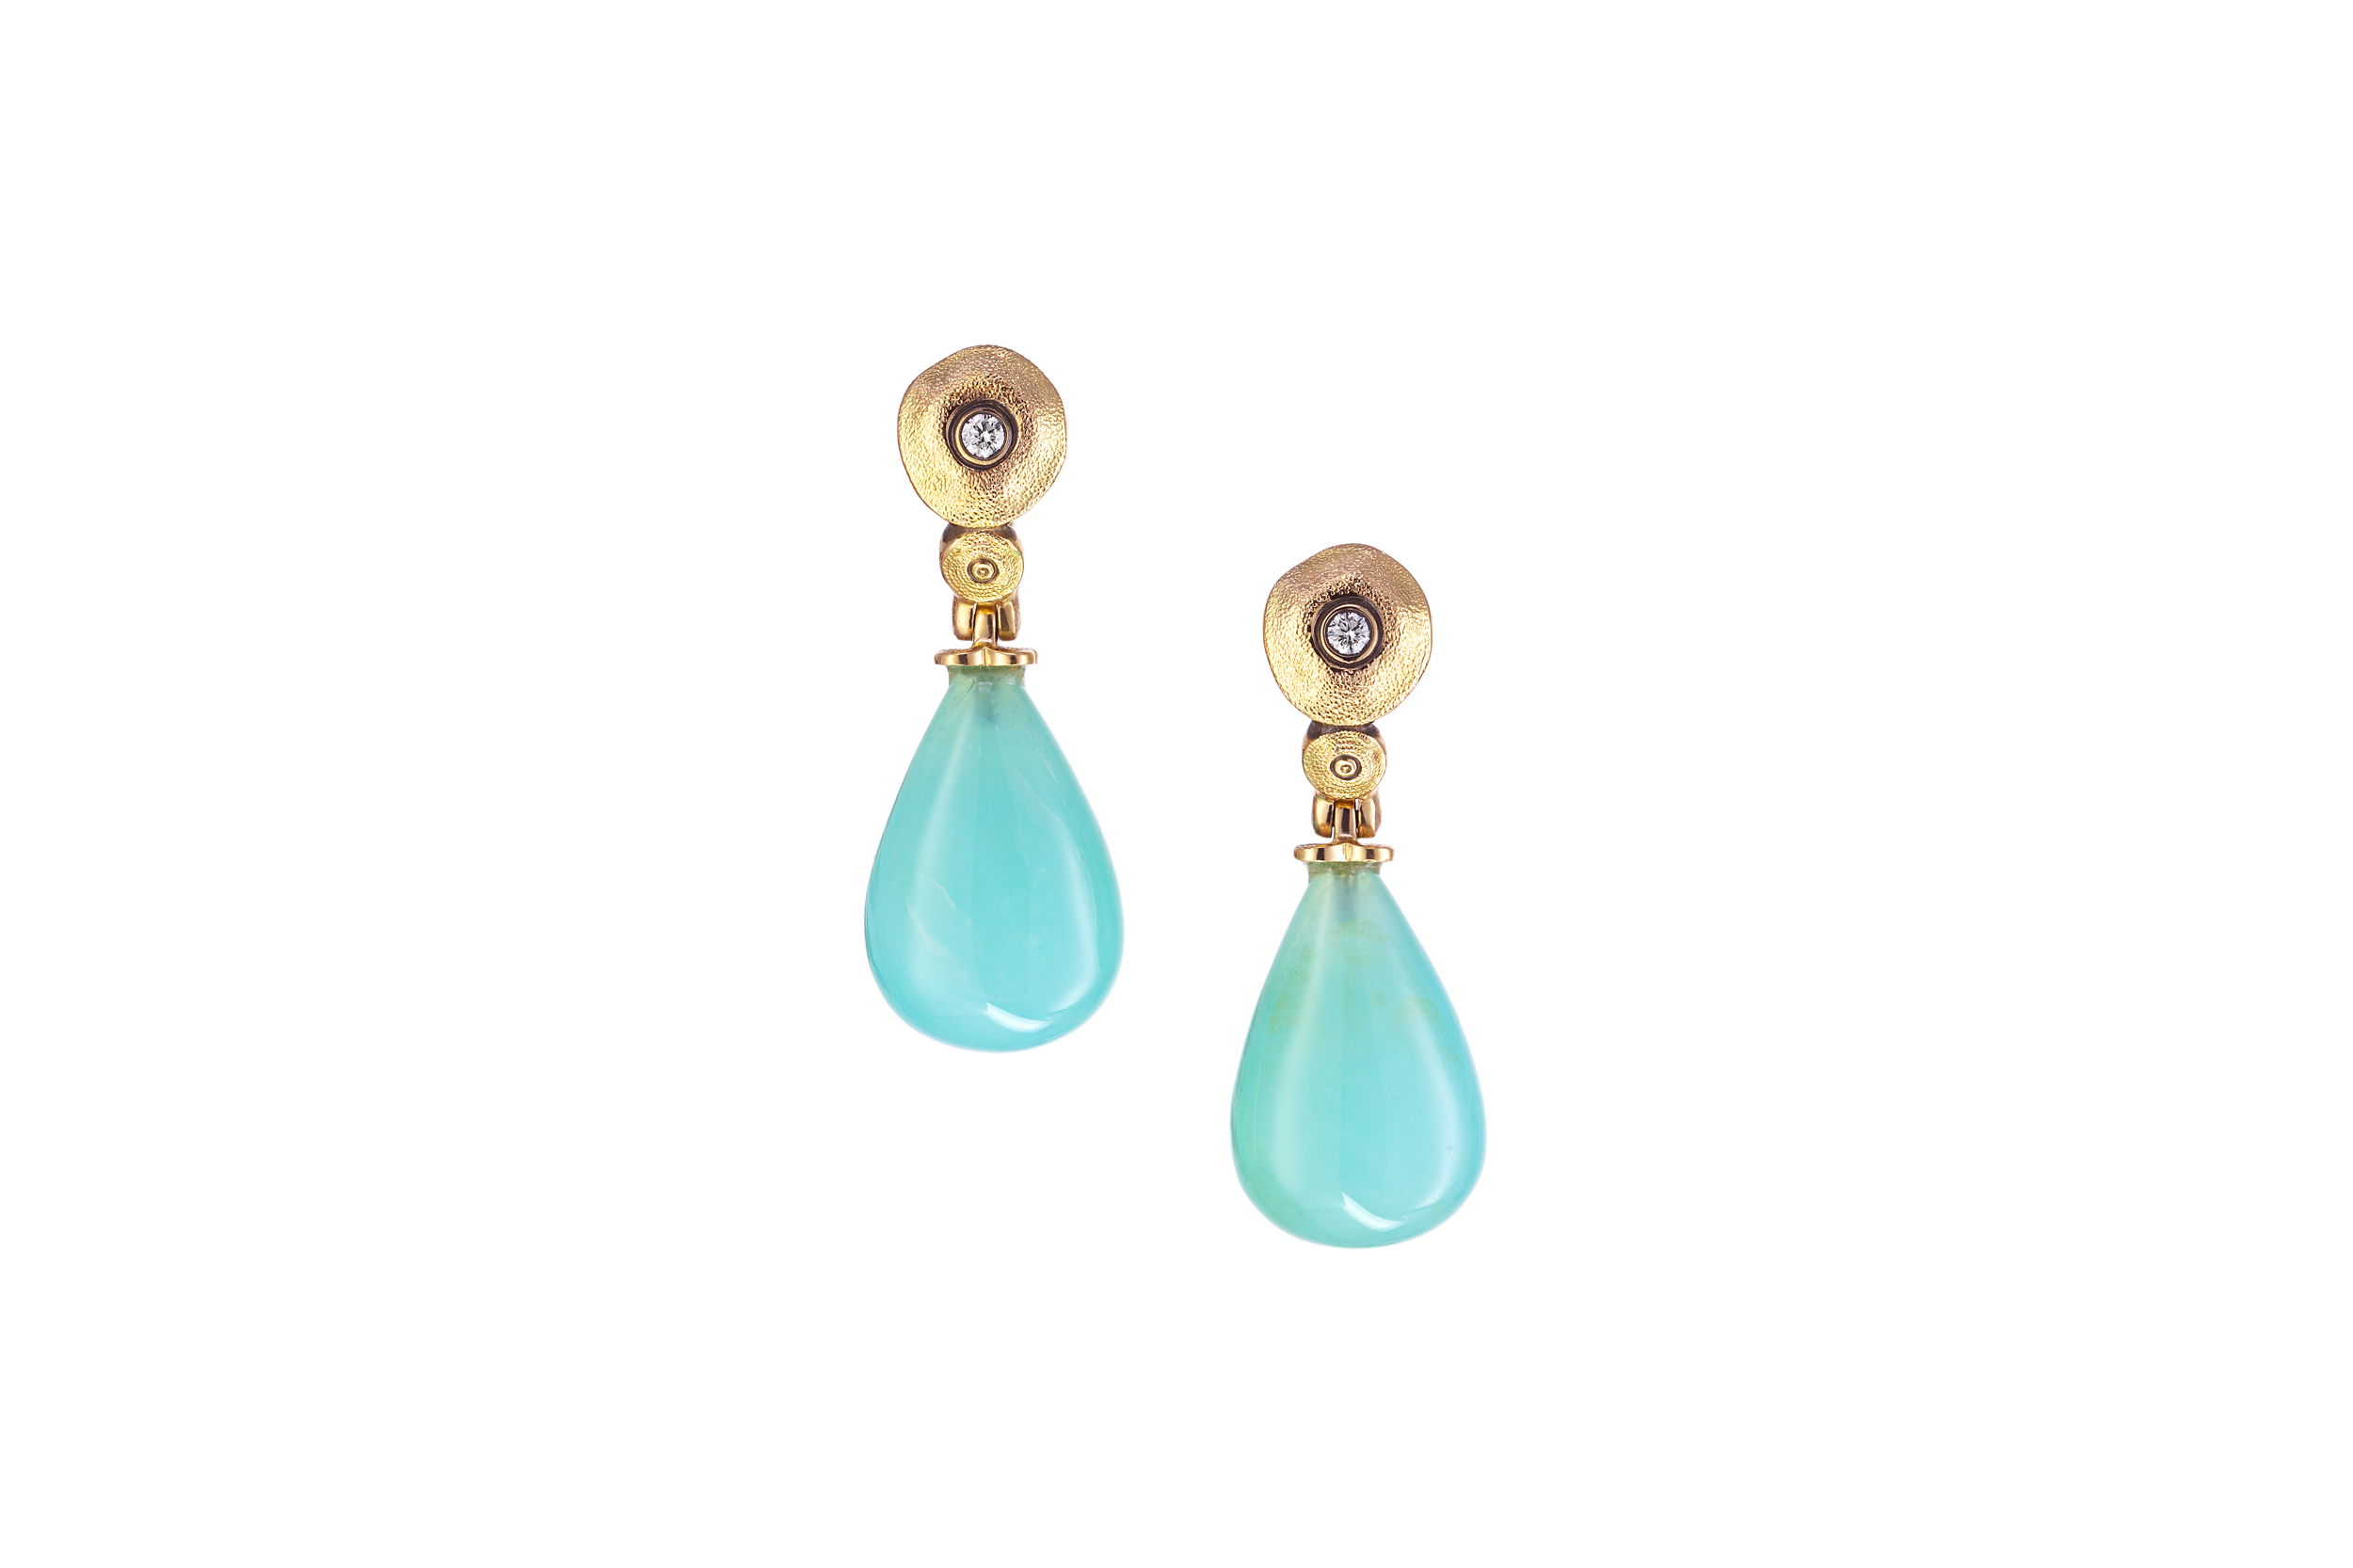 Sticks and Stones Earrings with Blue Opal Drops in 18kt Yellow Gold